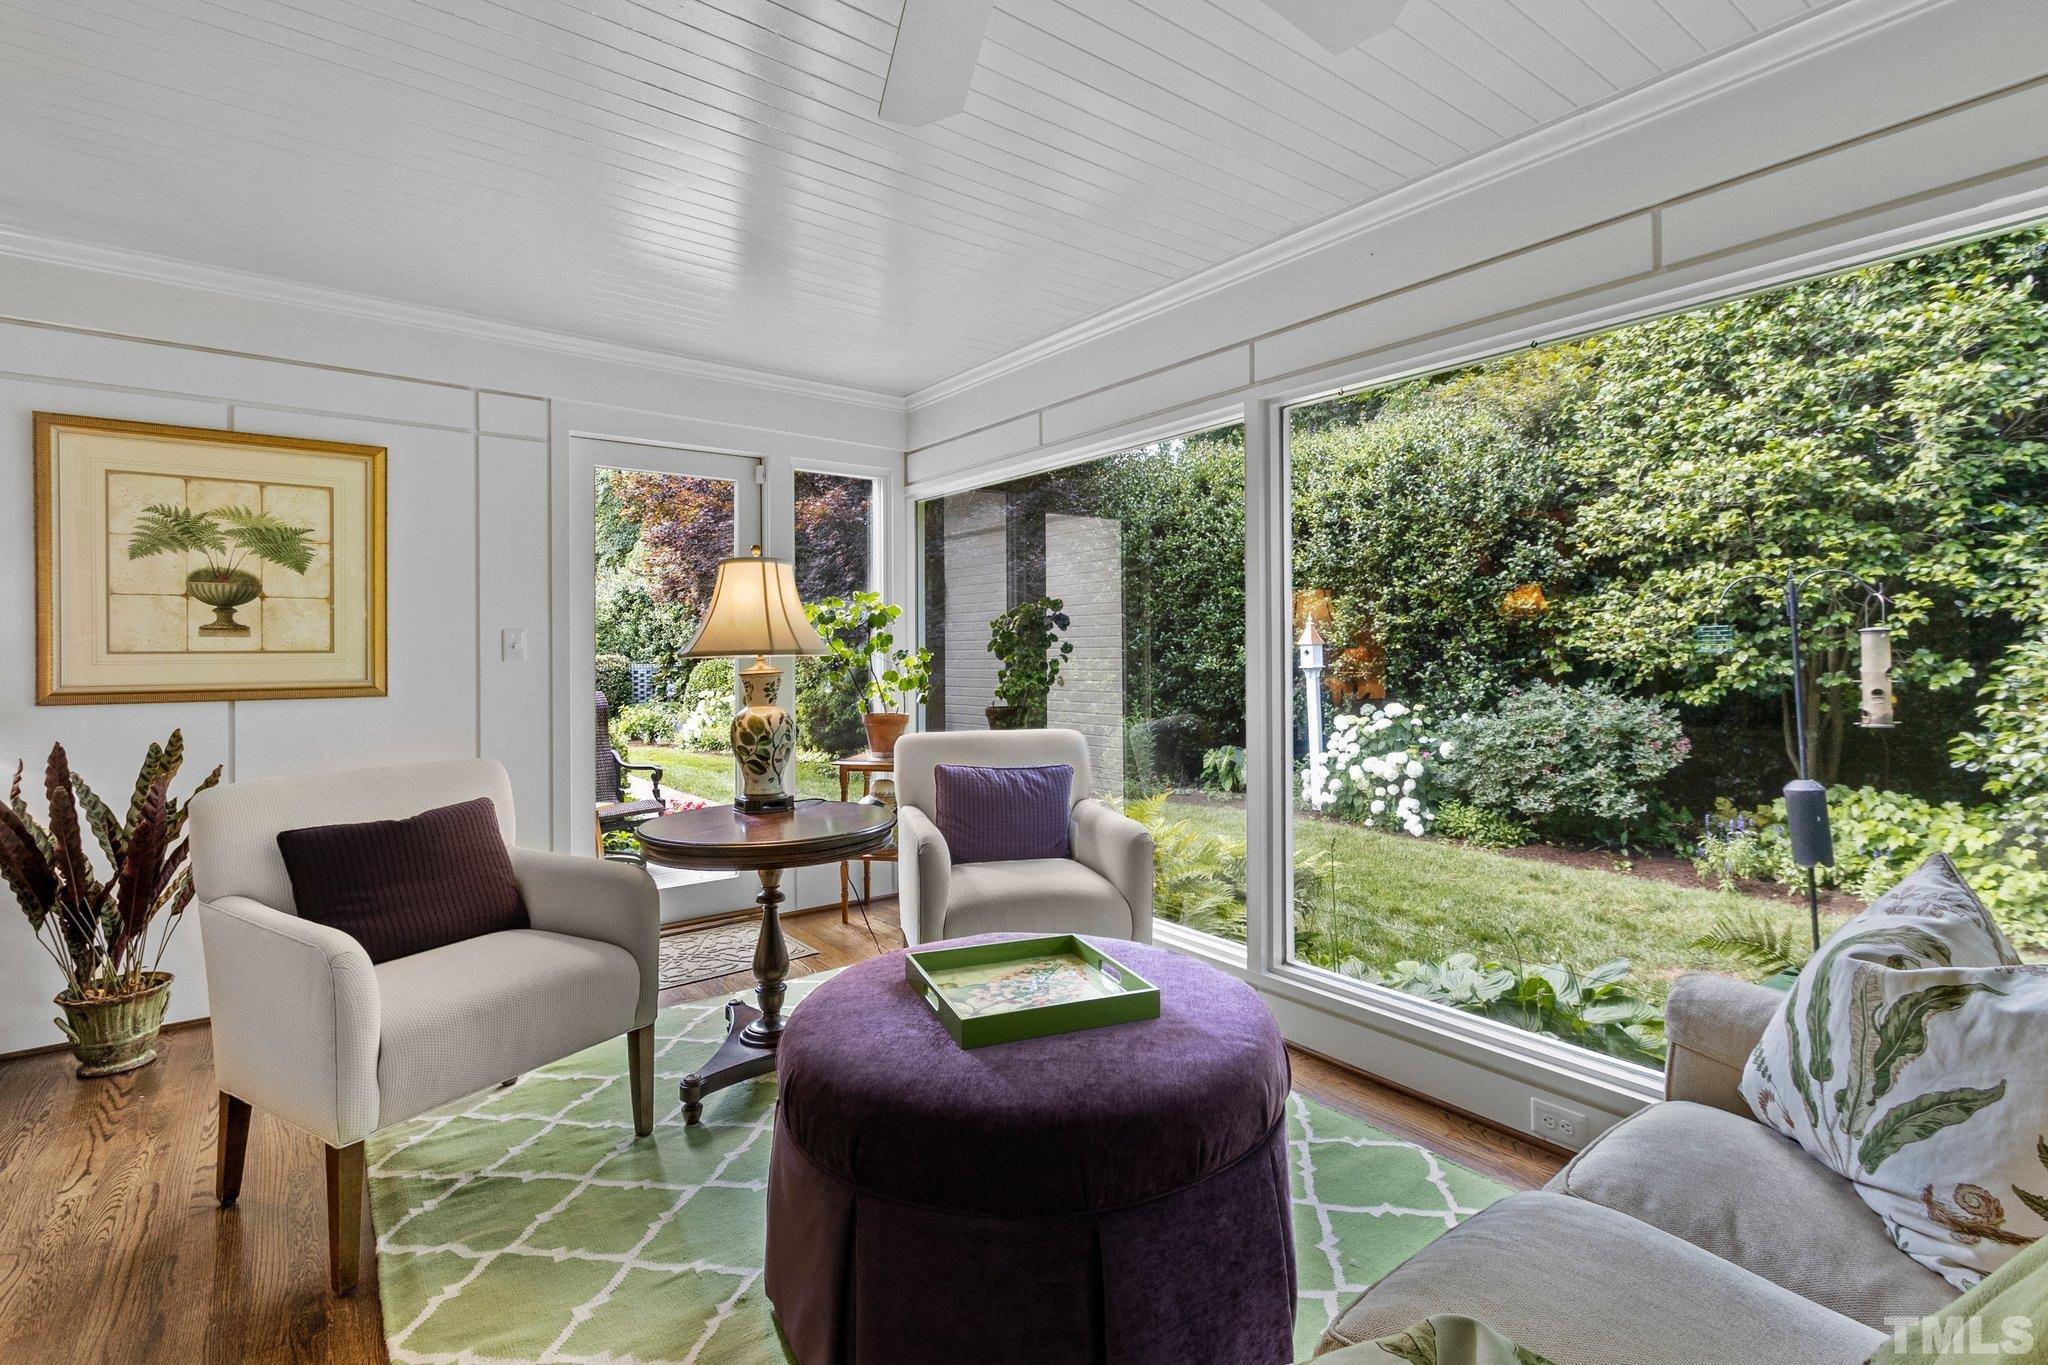 Breath taking views from the sunroom, filled with full windows allowing natural light and overlooking the impressive plantings and mature hedges that cannot be reporduced in our lifetime.